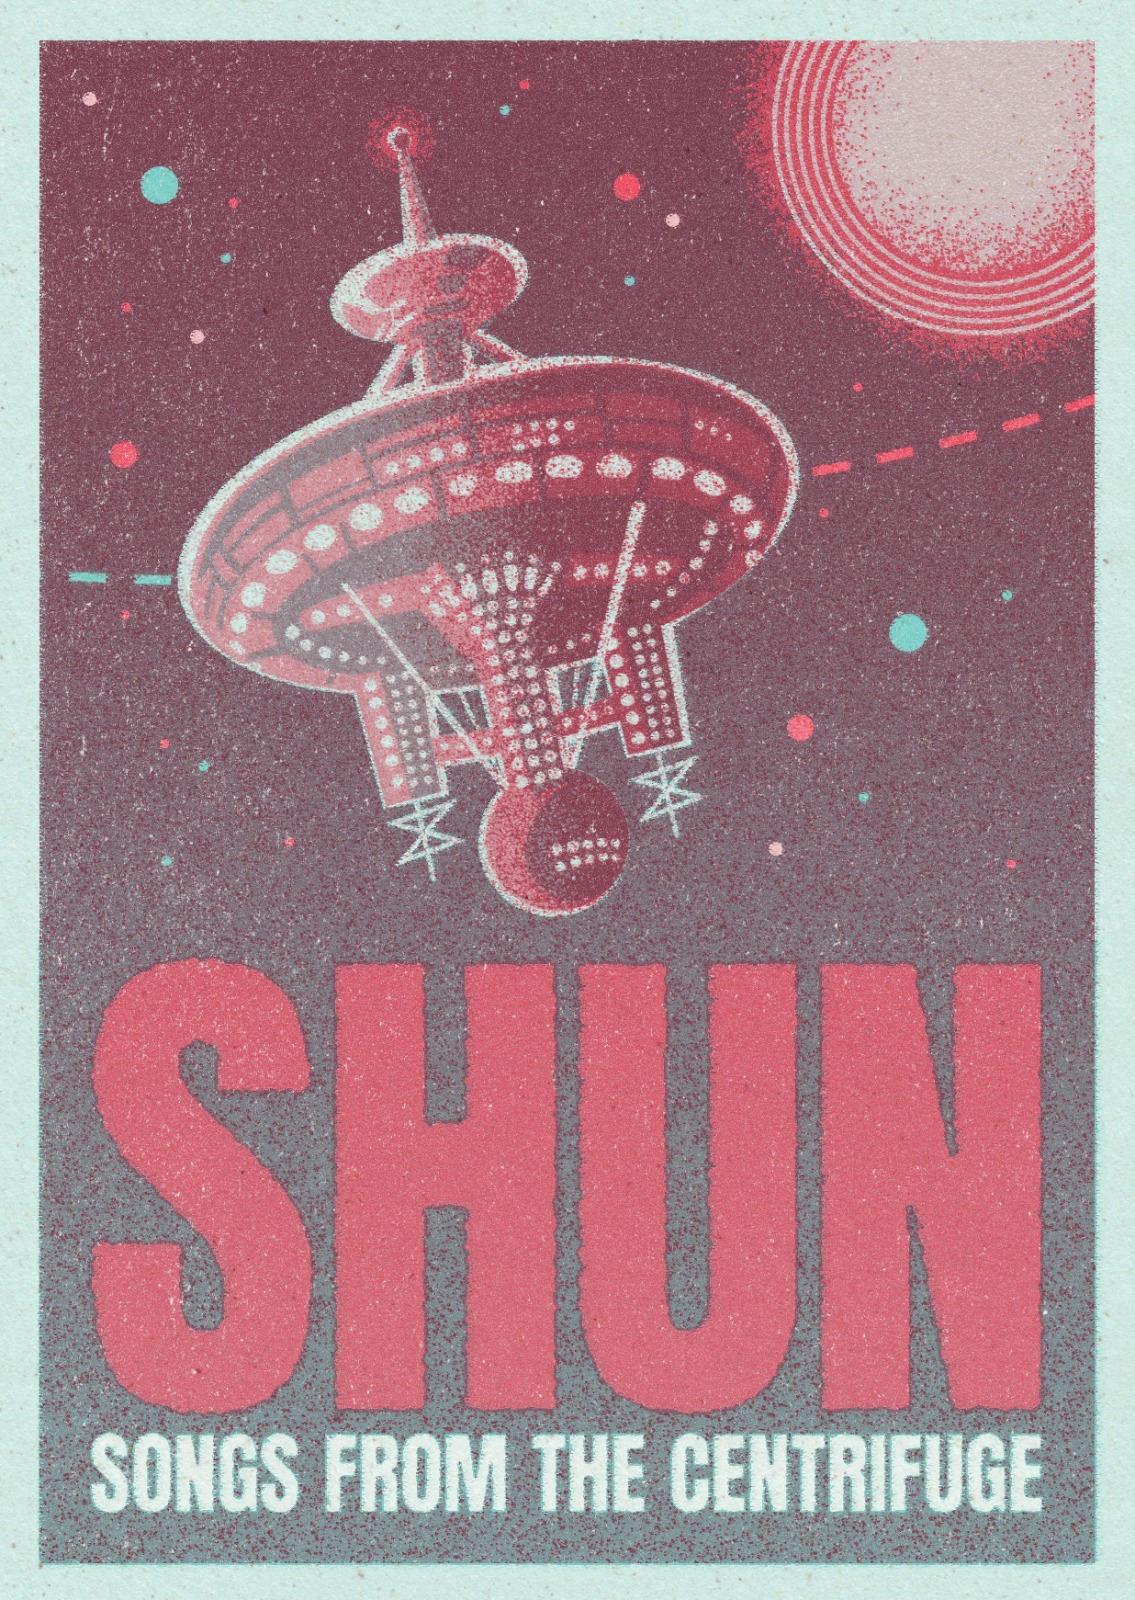 Shun - Songs From The Centrifuge 180 Gramm col.LP Pressing Info: 100x orange wax 180 Gramm Lps with Riso Postcards plus SHUN / TCM Stamps and Poster 400x blue wax LP 180 Gramm, with Poster 300x CDs 10x Testpresses